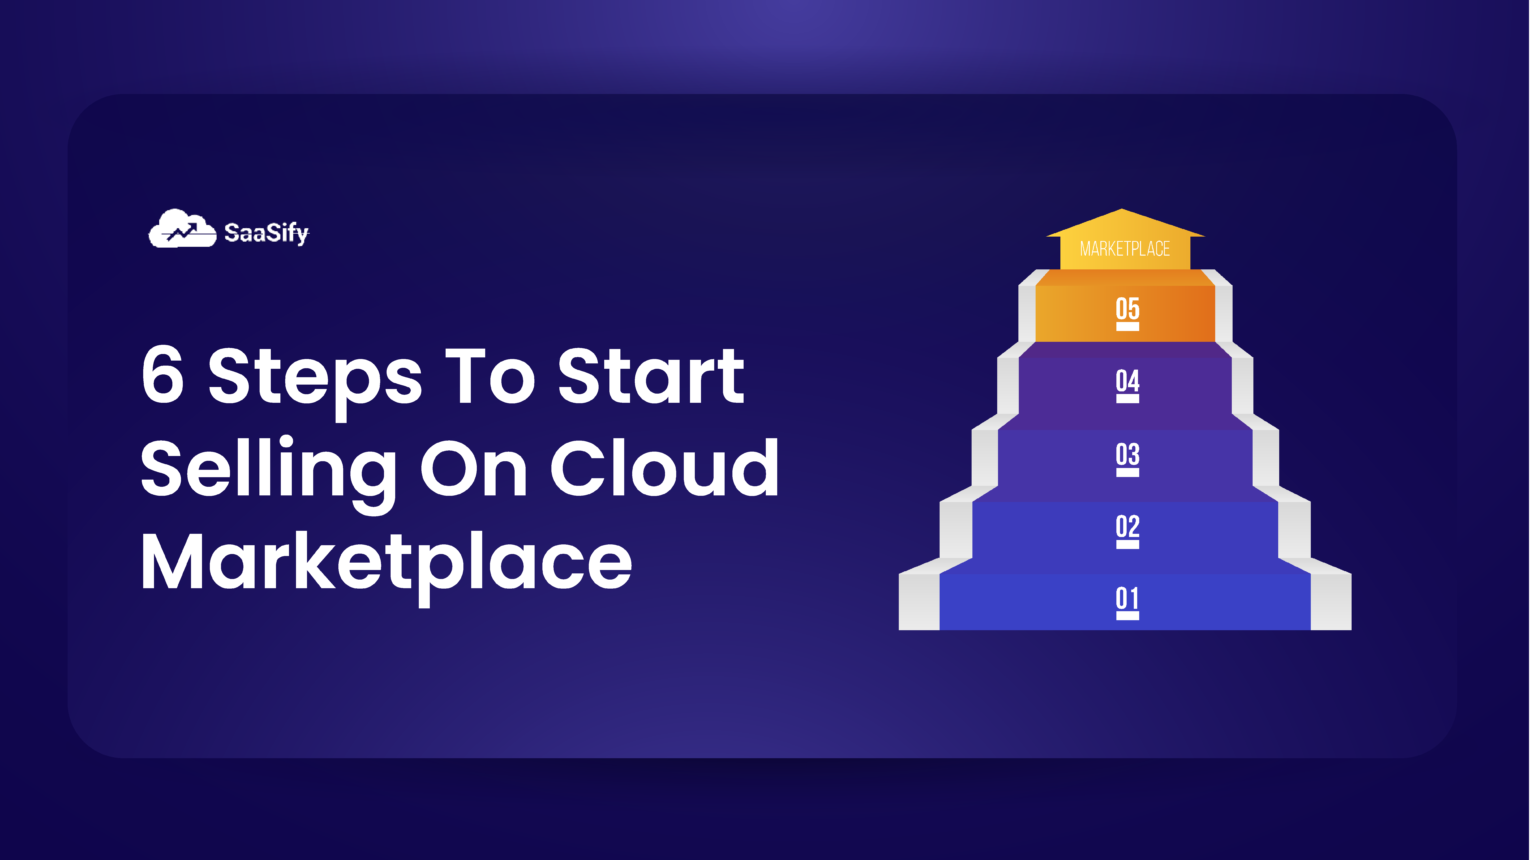 6 Steps To Start Selling On Cloud Marketplaces